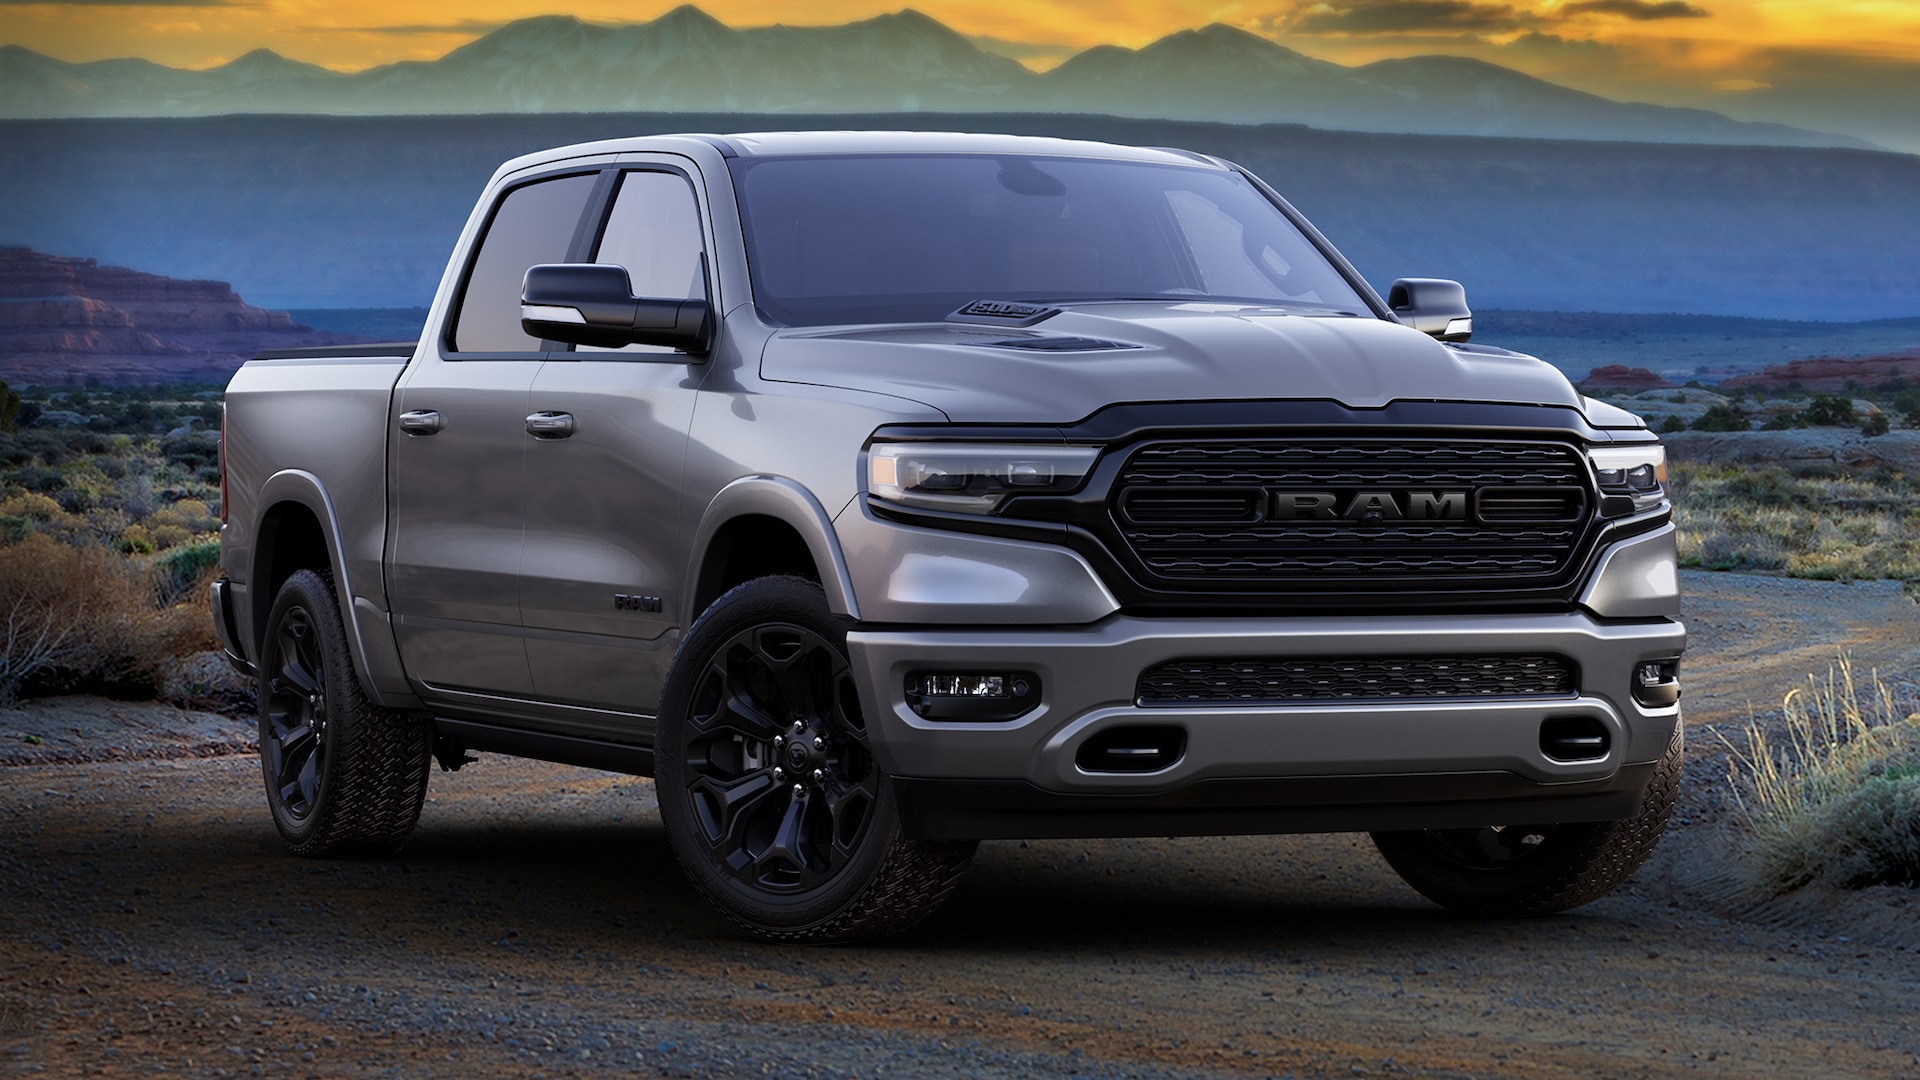 2021 Ram 1500 and HD Limited Night Editions are Tall, Dark, and Handsome